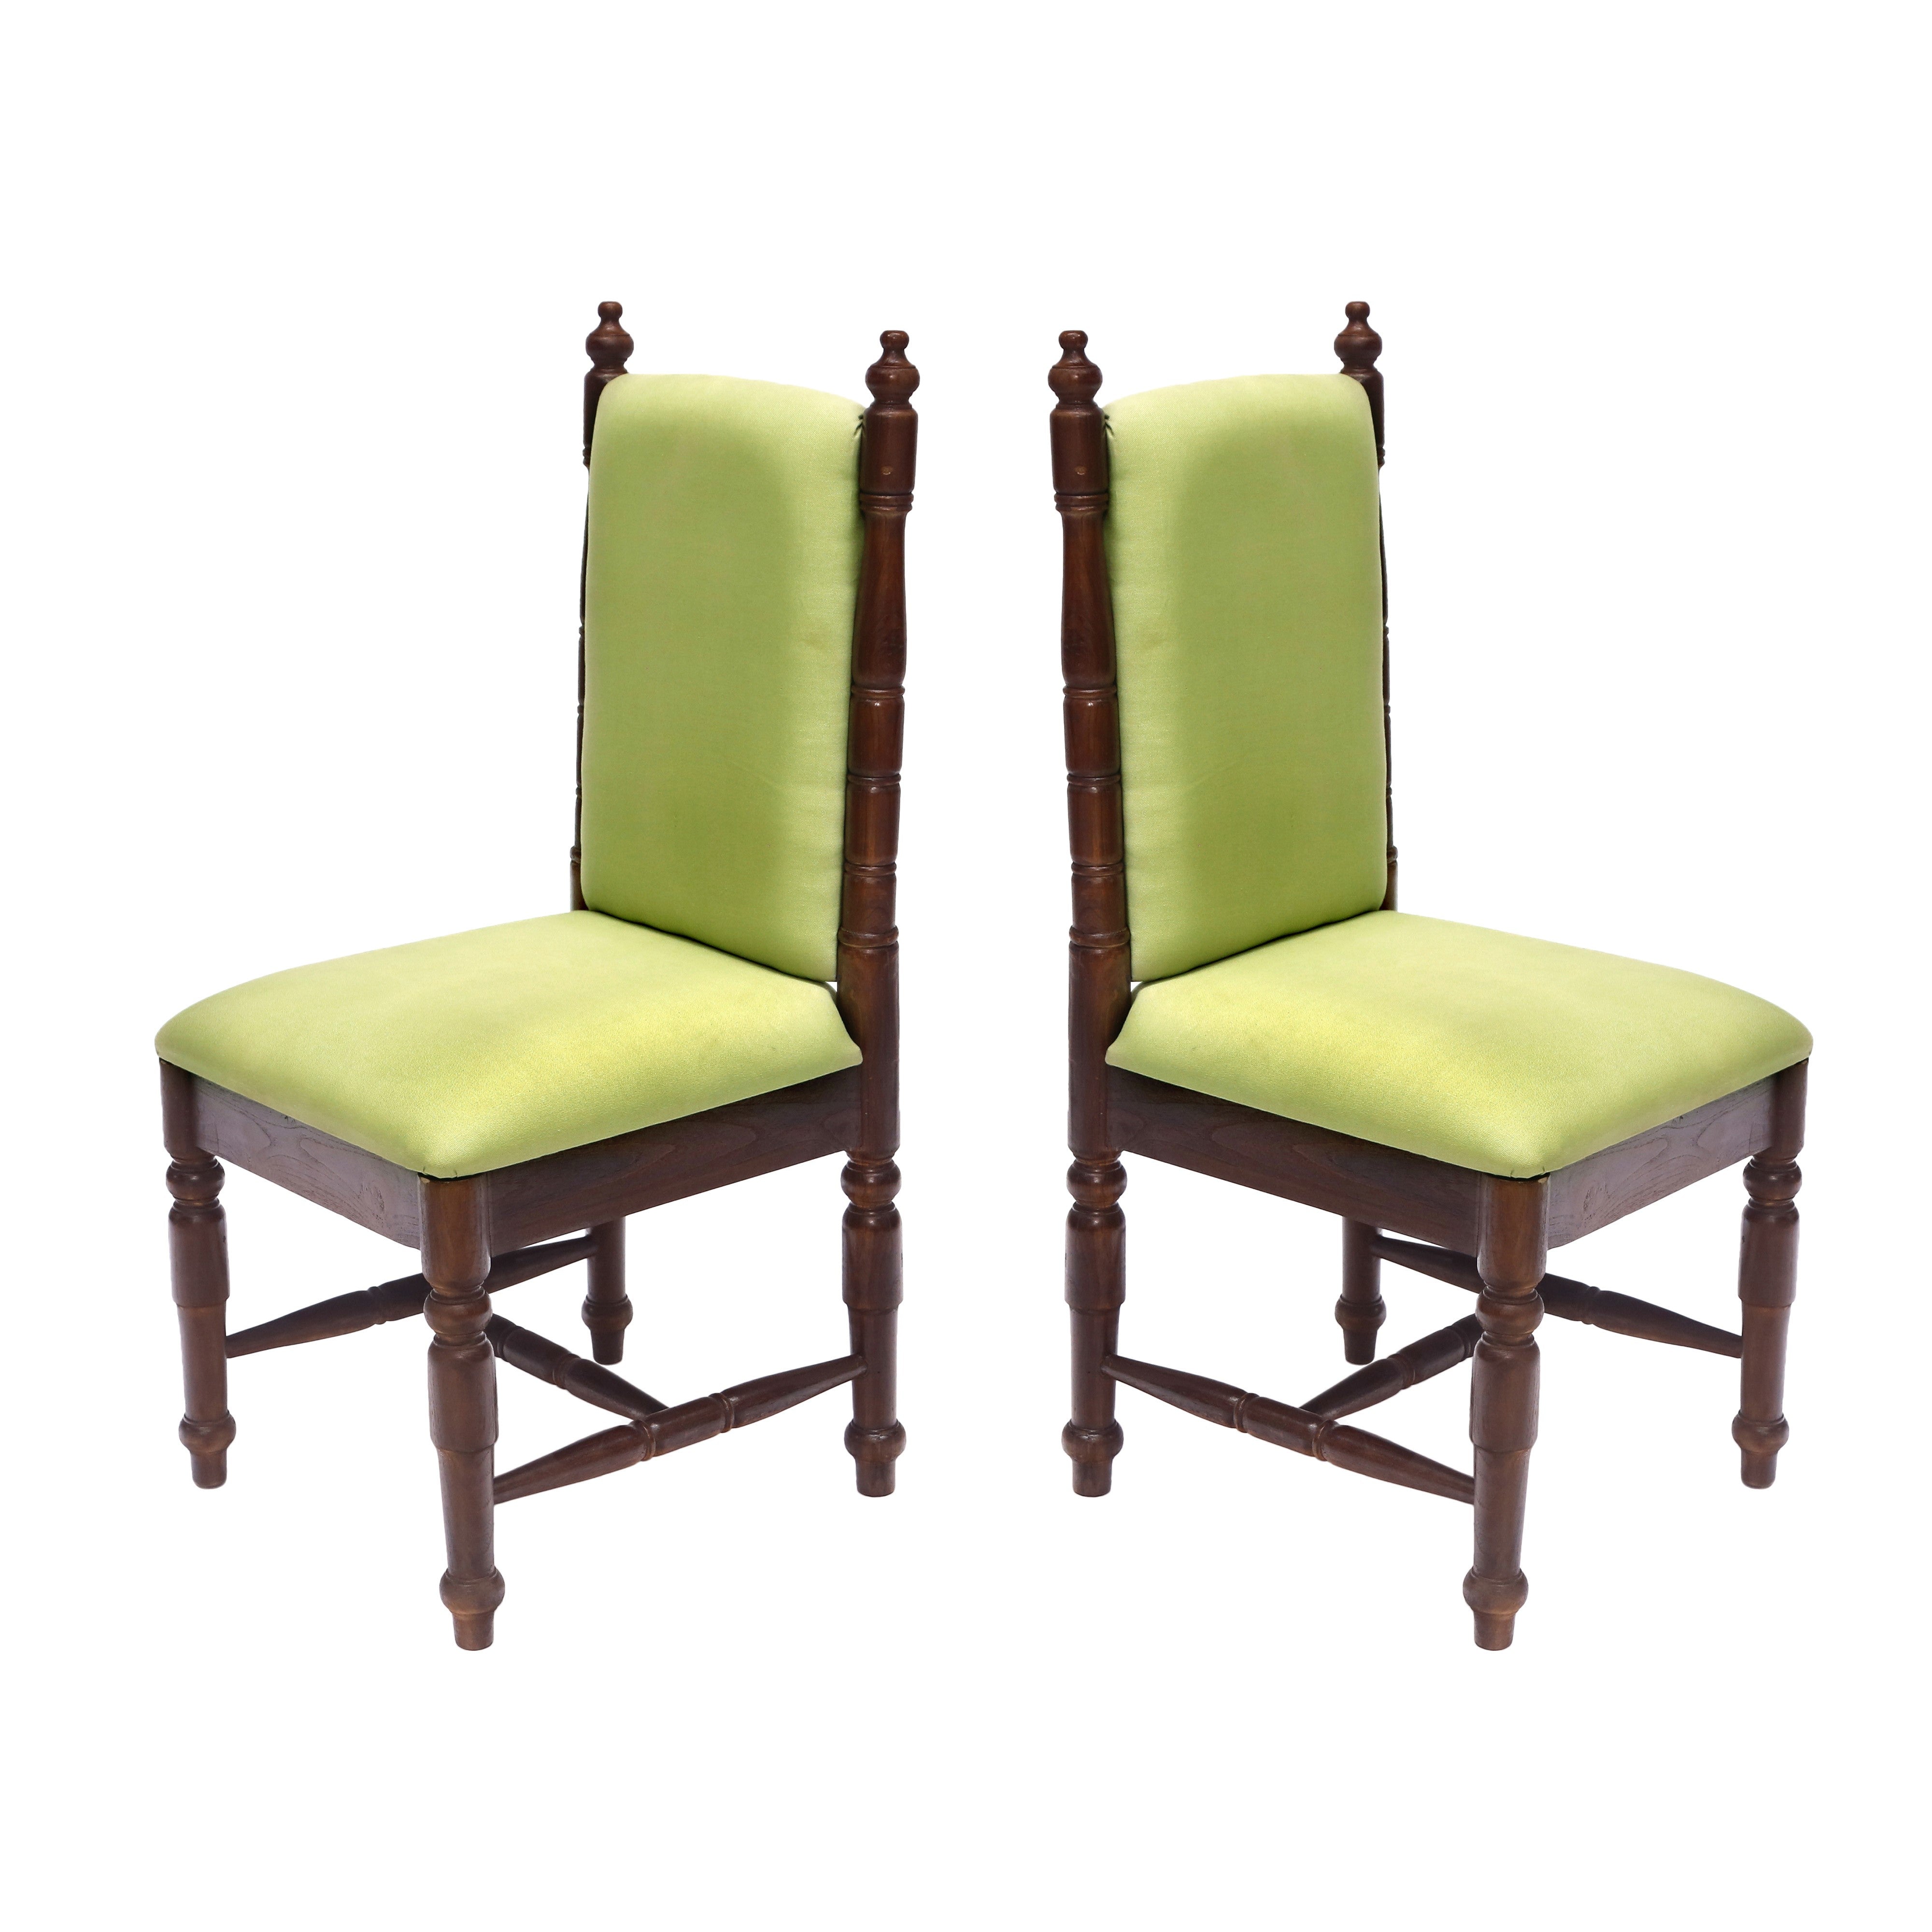 (Set of 2) Spiral Long Back Chair Dining Chair